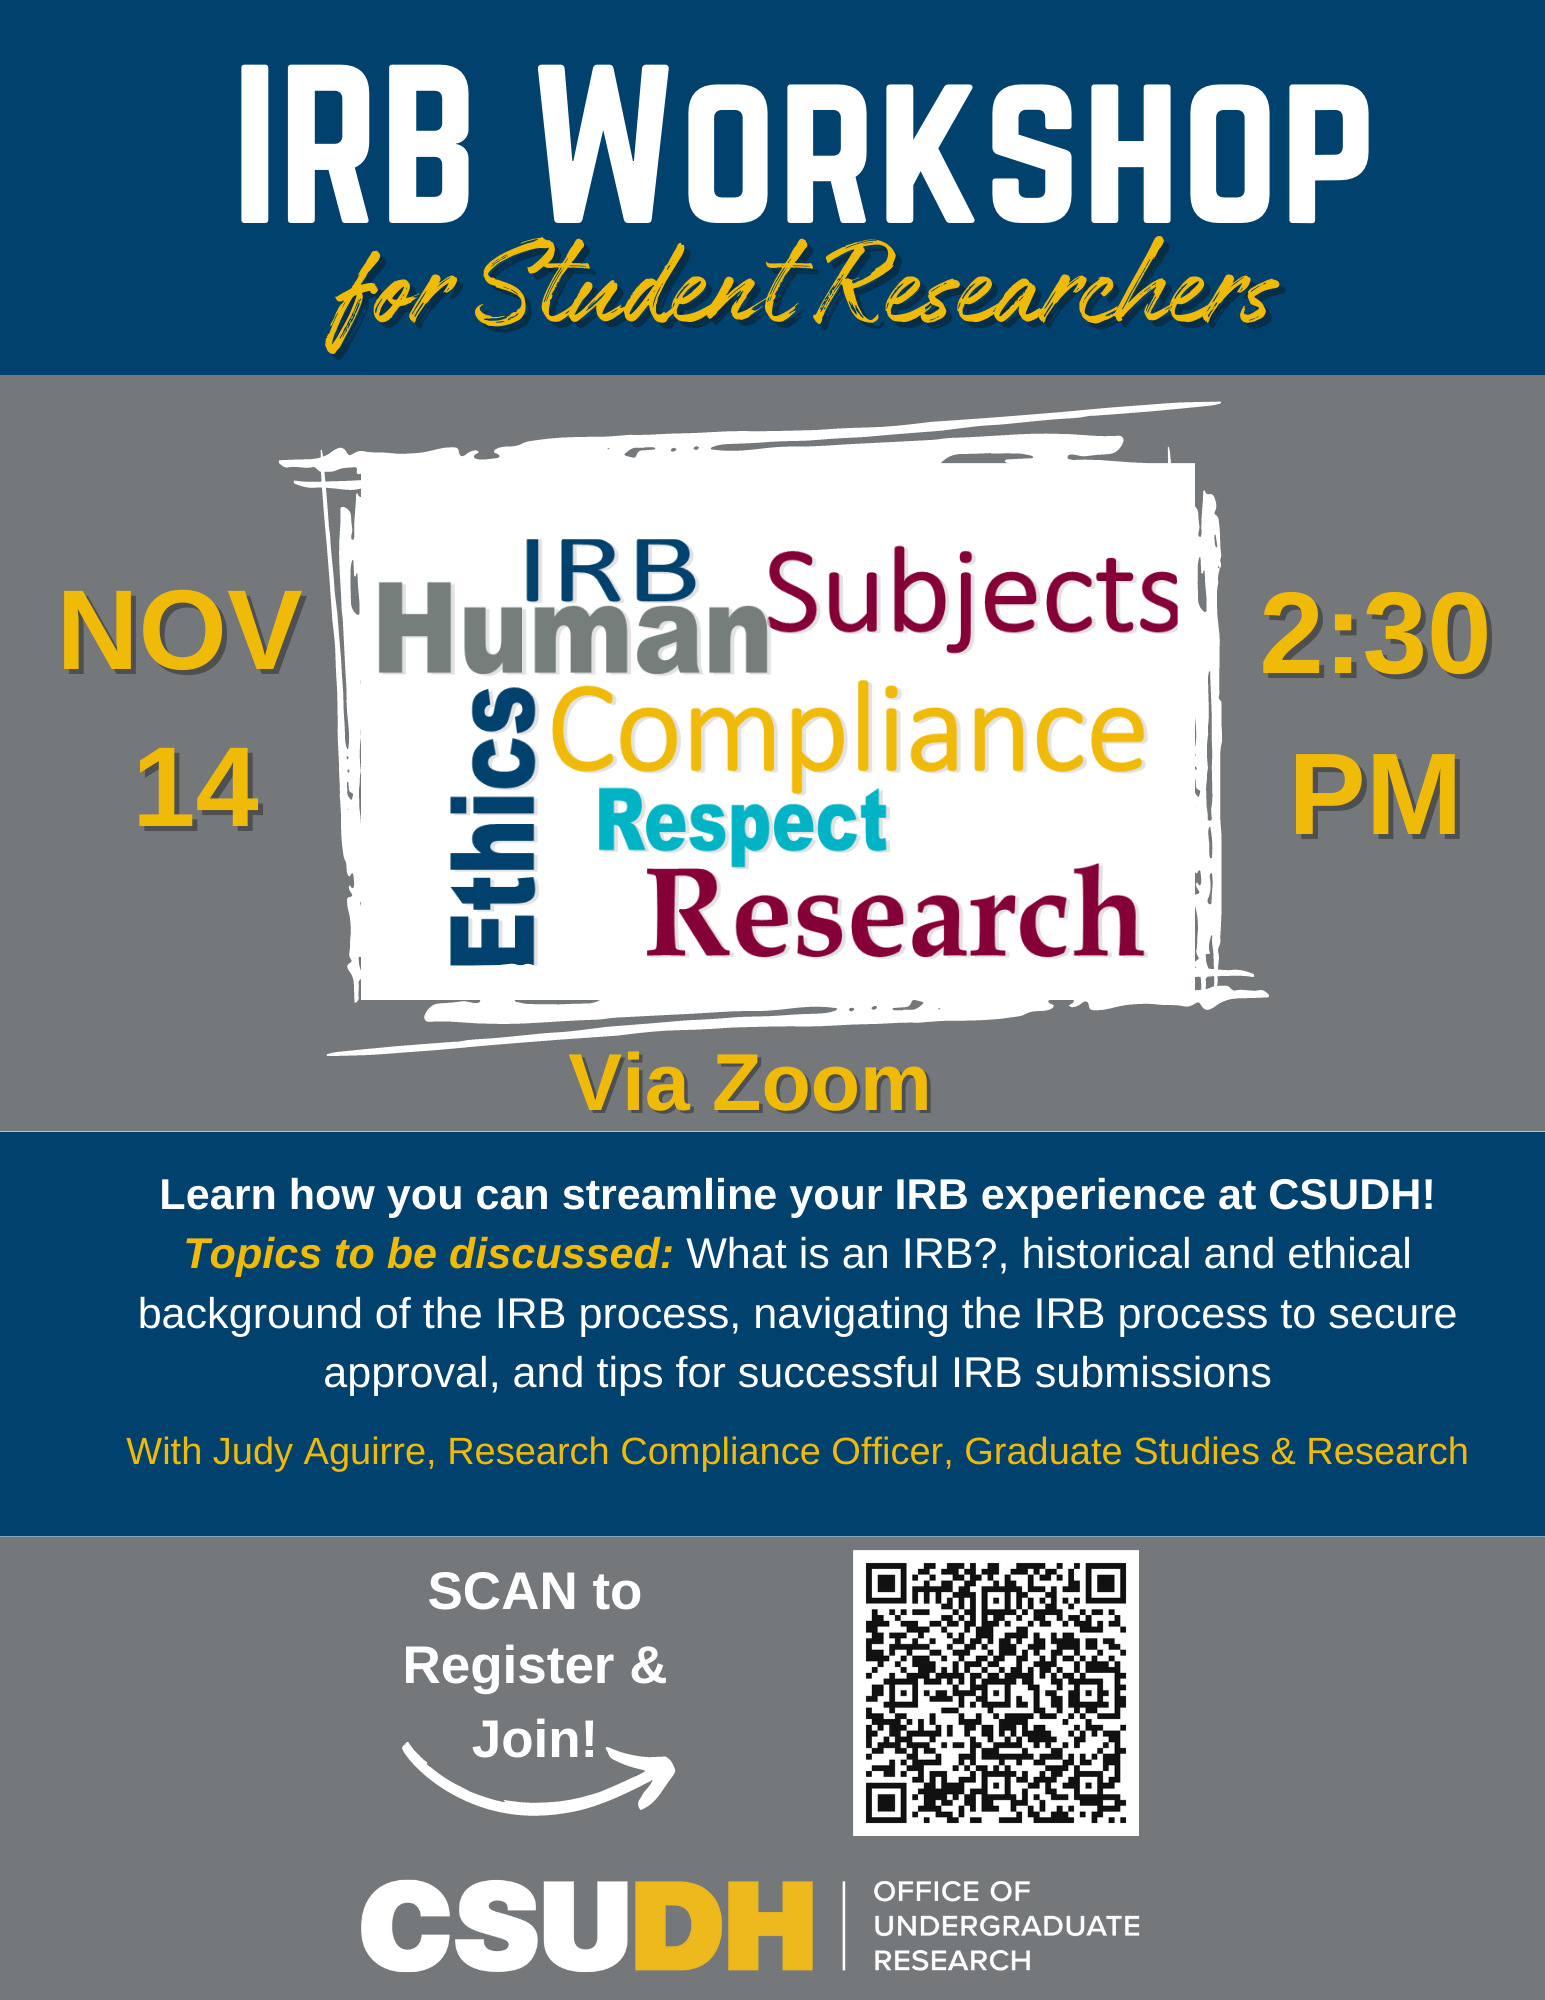 IRB-Workshop-for-Student-Researchers-11-14-23